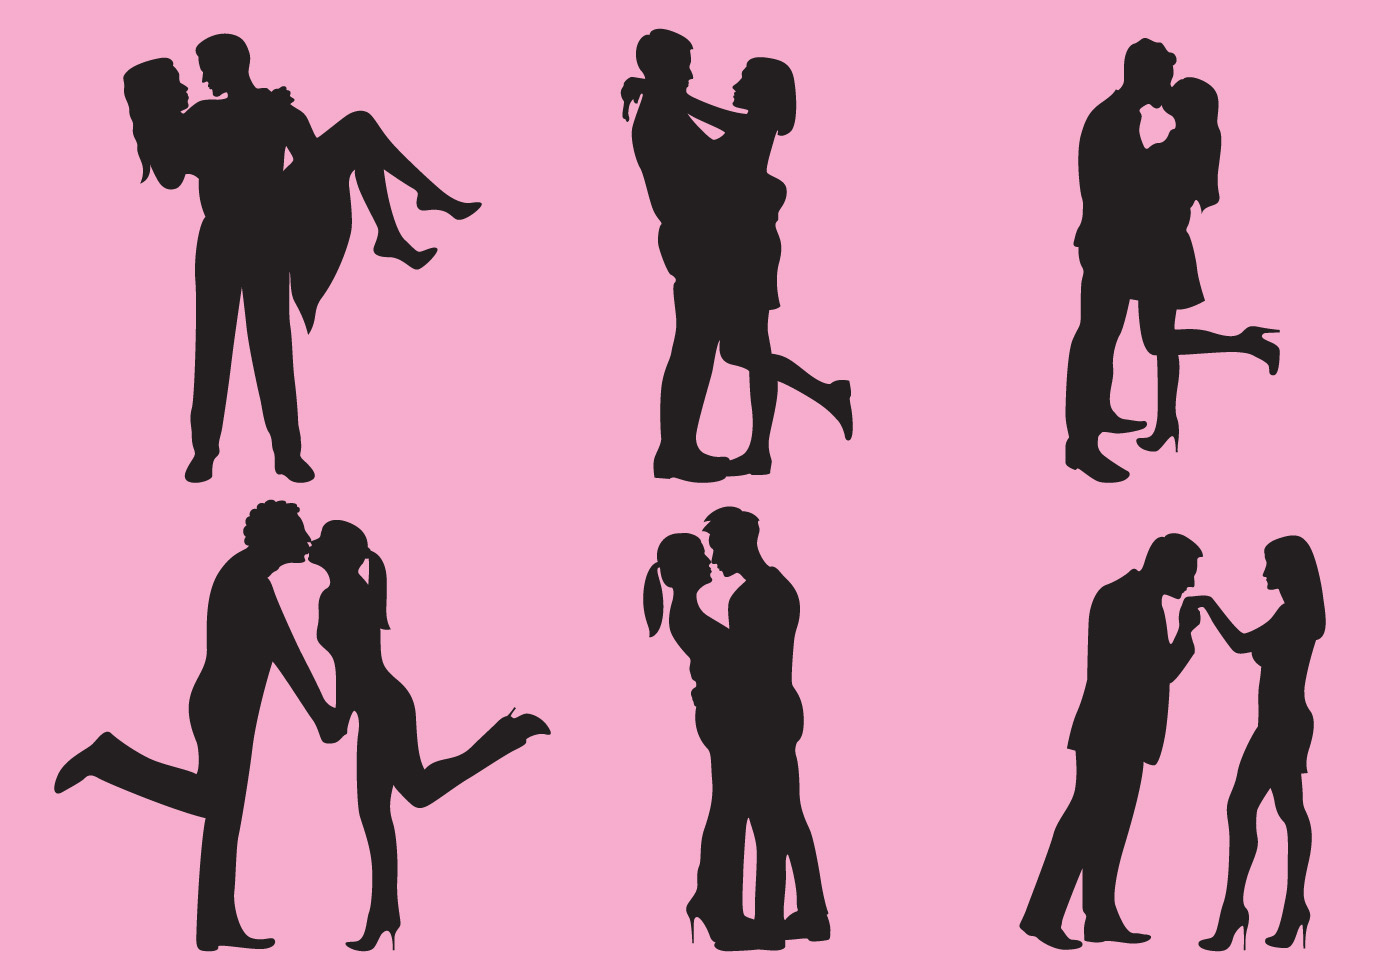 Download Woman And Man Love Silhouettes - Download Free Vectors, Clipart Graphics & Vector Art